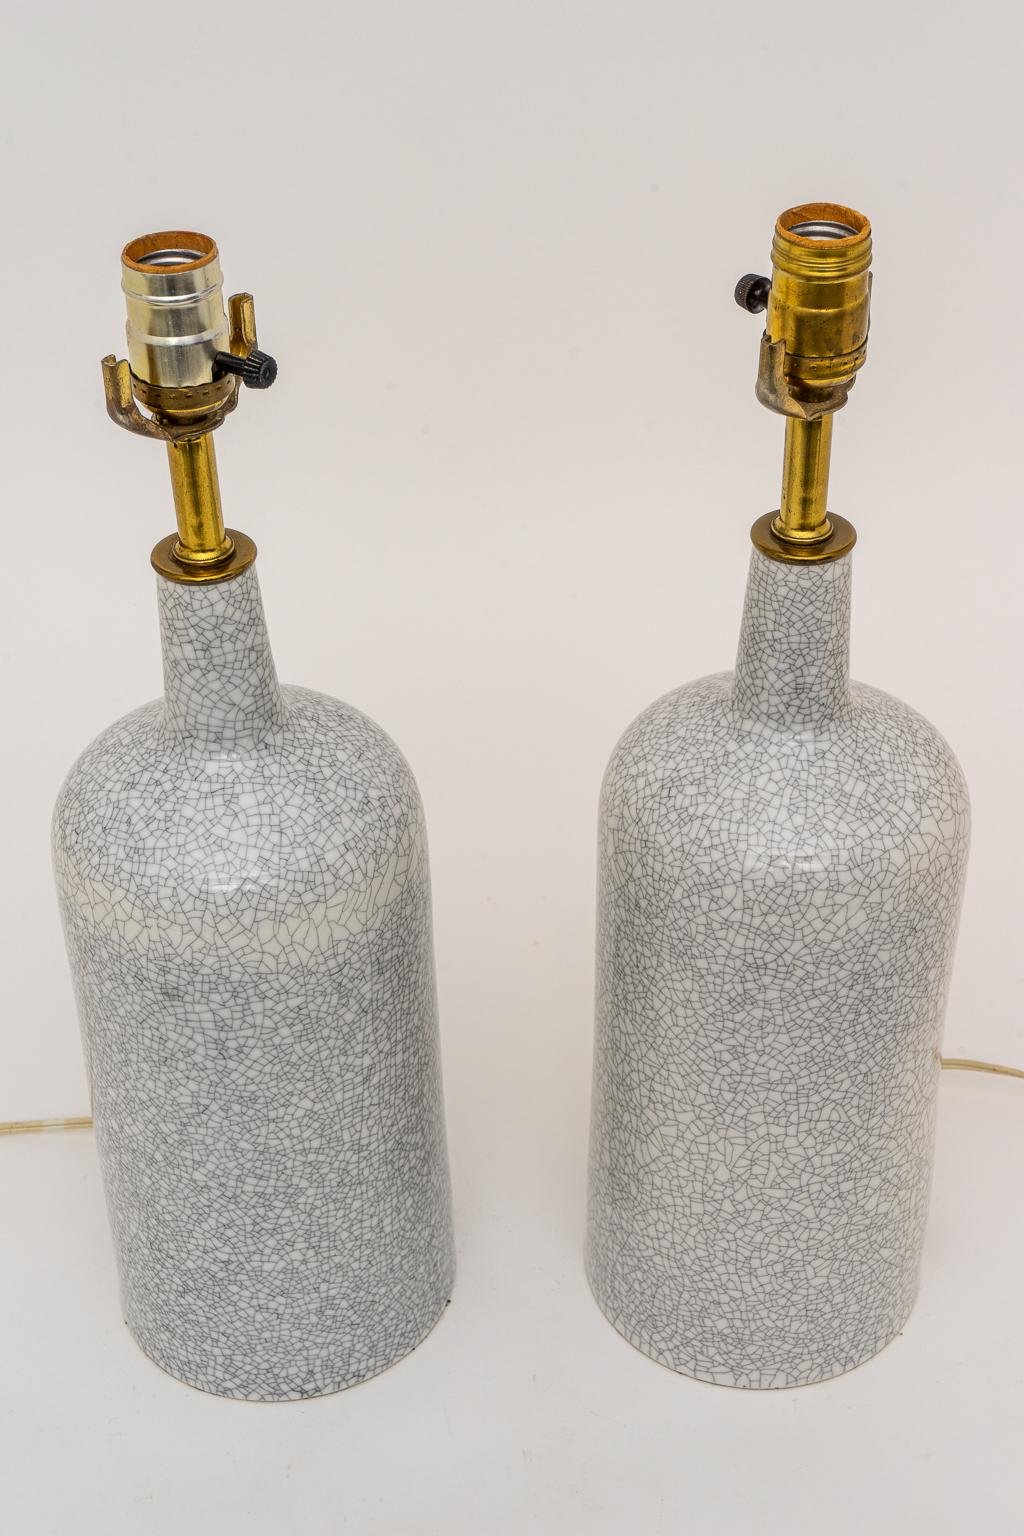 20th Century Pair of Crackle Glaze Lamps by Arabia